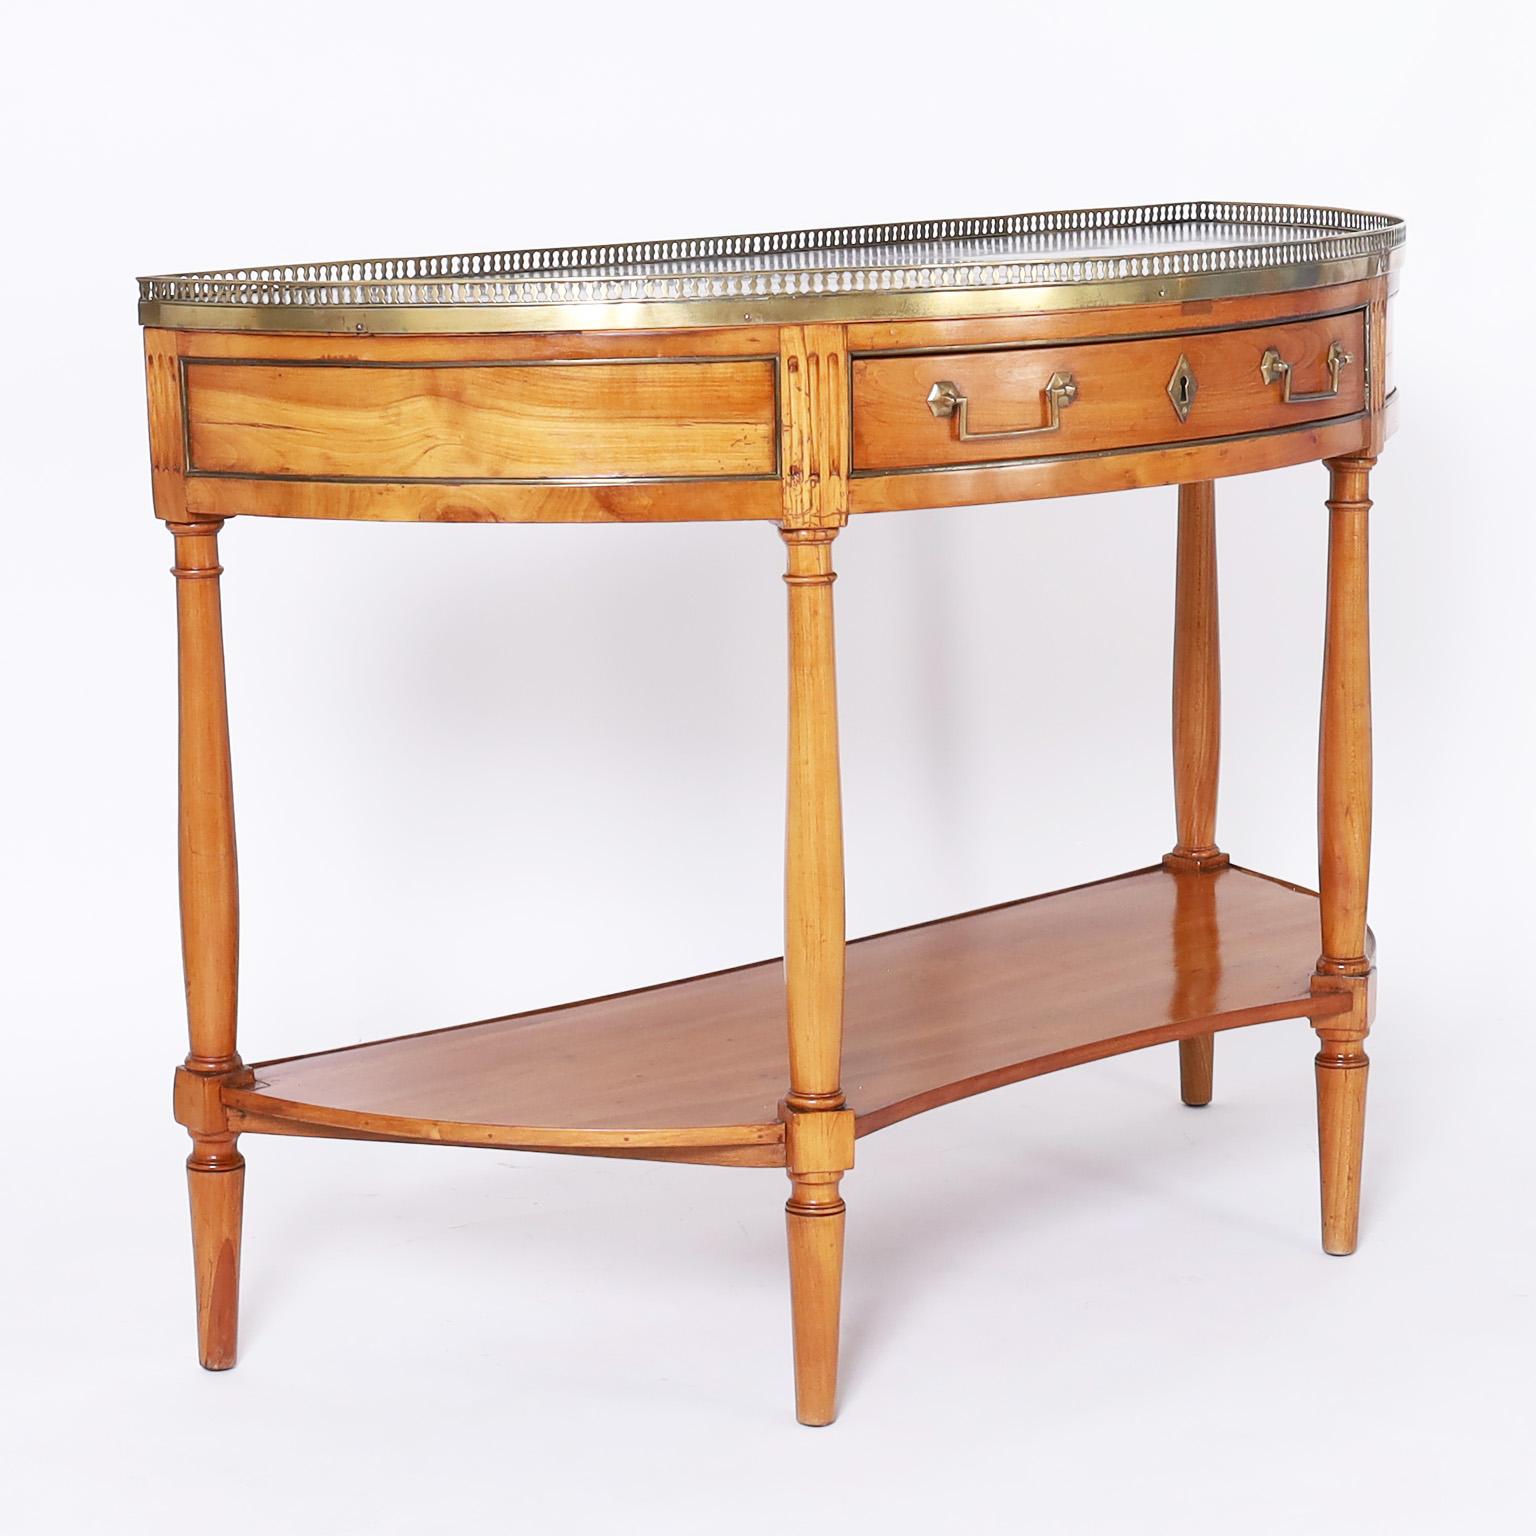 Antique French Directoire style server crafted in fruitwood with a demi-lune form having a black and white marble top with a brass gallery on a one drawer case with brass hardware on turned supports joined by a lower tier on tapered feet.